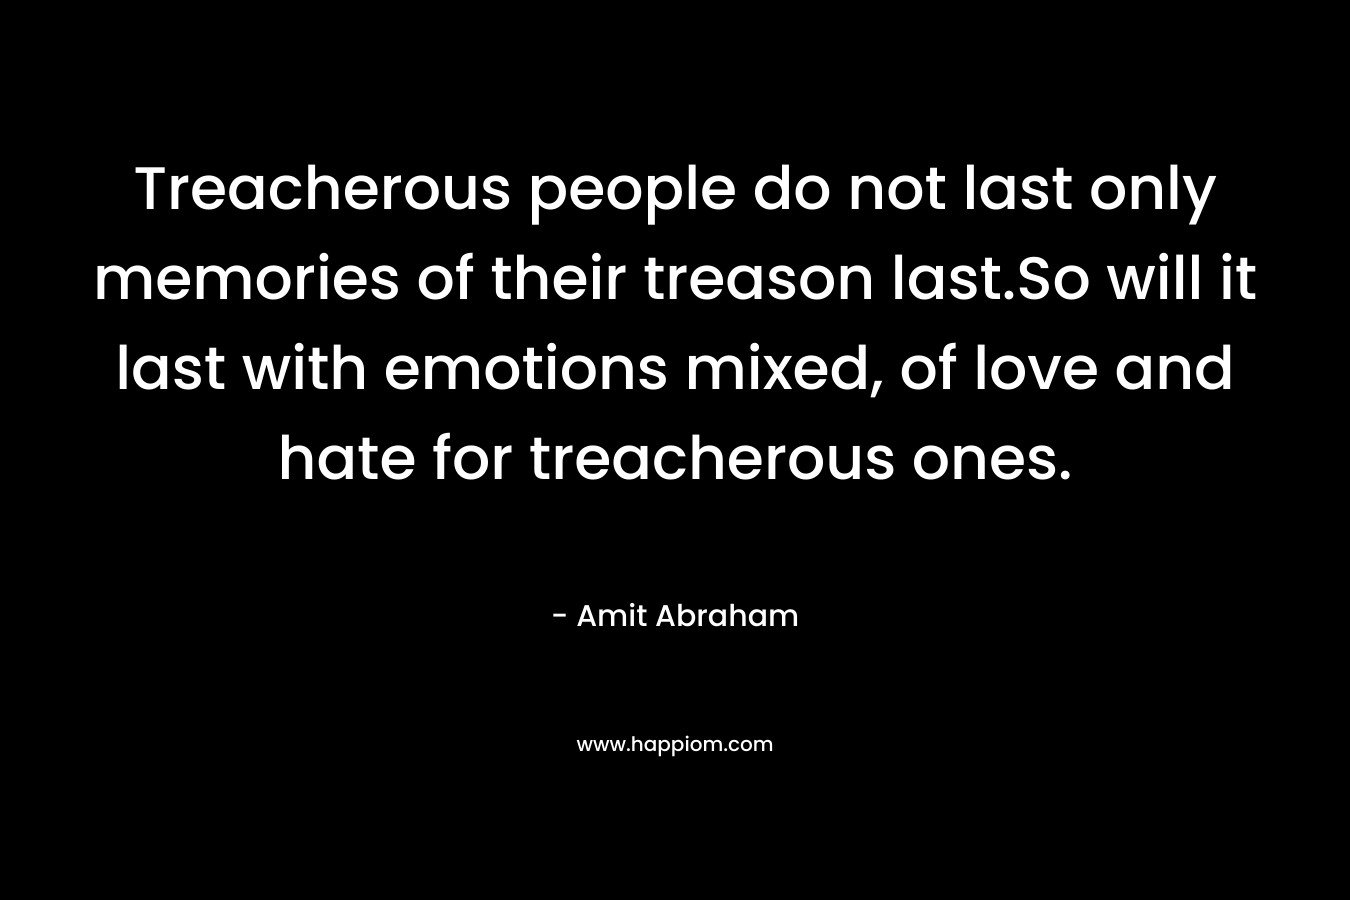 Treacherous people do not last only memories of their treason last.So will it last with emotions mixed, of love and hate for treacherous ones.